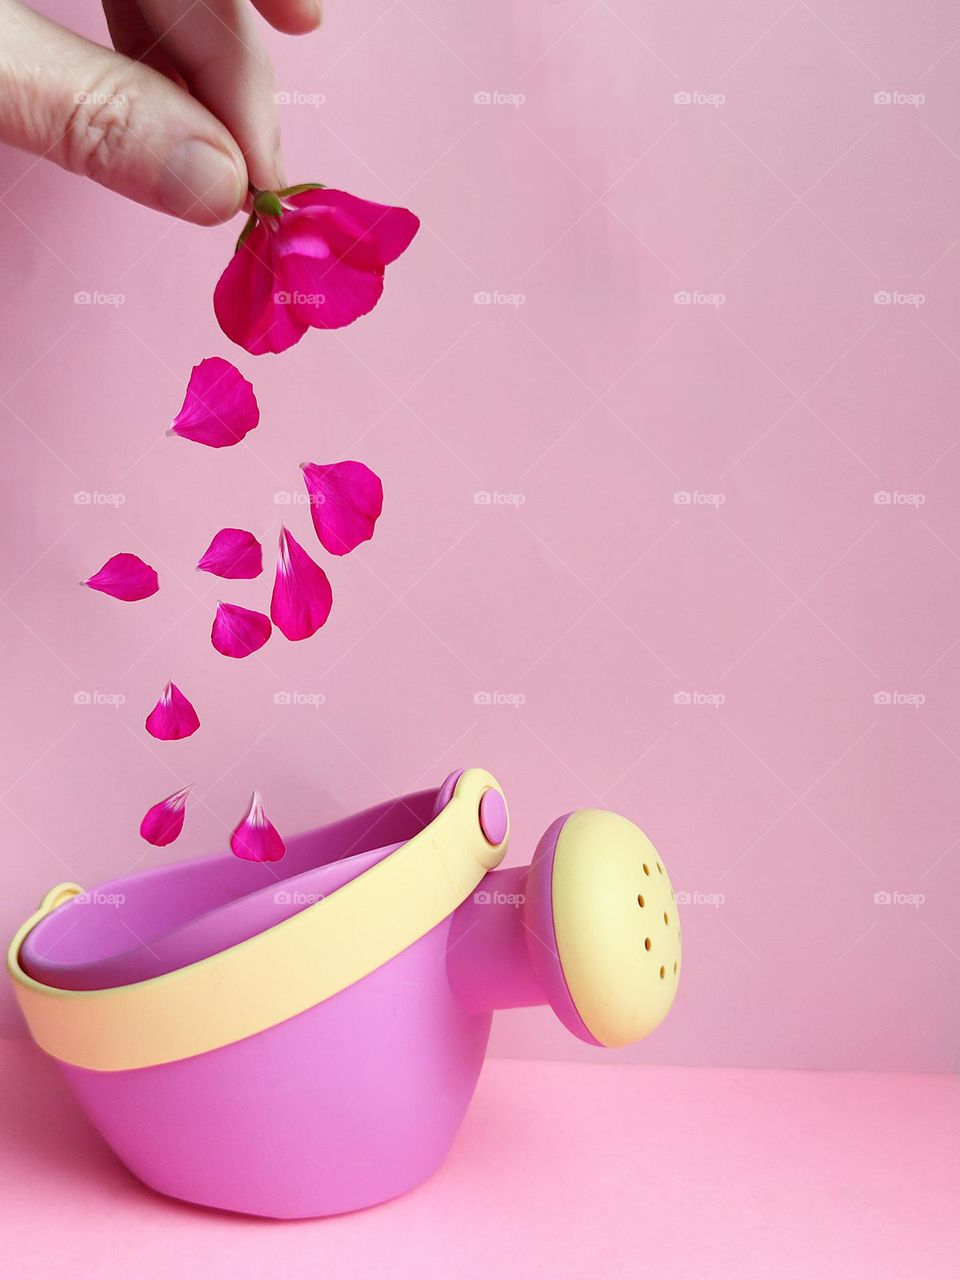 All shades of pink.Against the background of a baby pink color,there is a pink watering can with a yellow handle and a yellow watering can tip.Above the watering can, the hand holds a dark pink flower,the petals of which fall into the watering can